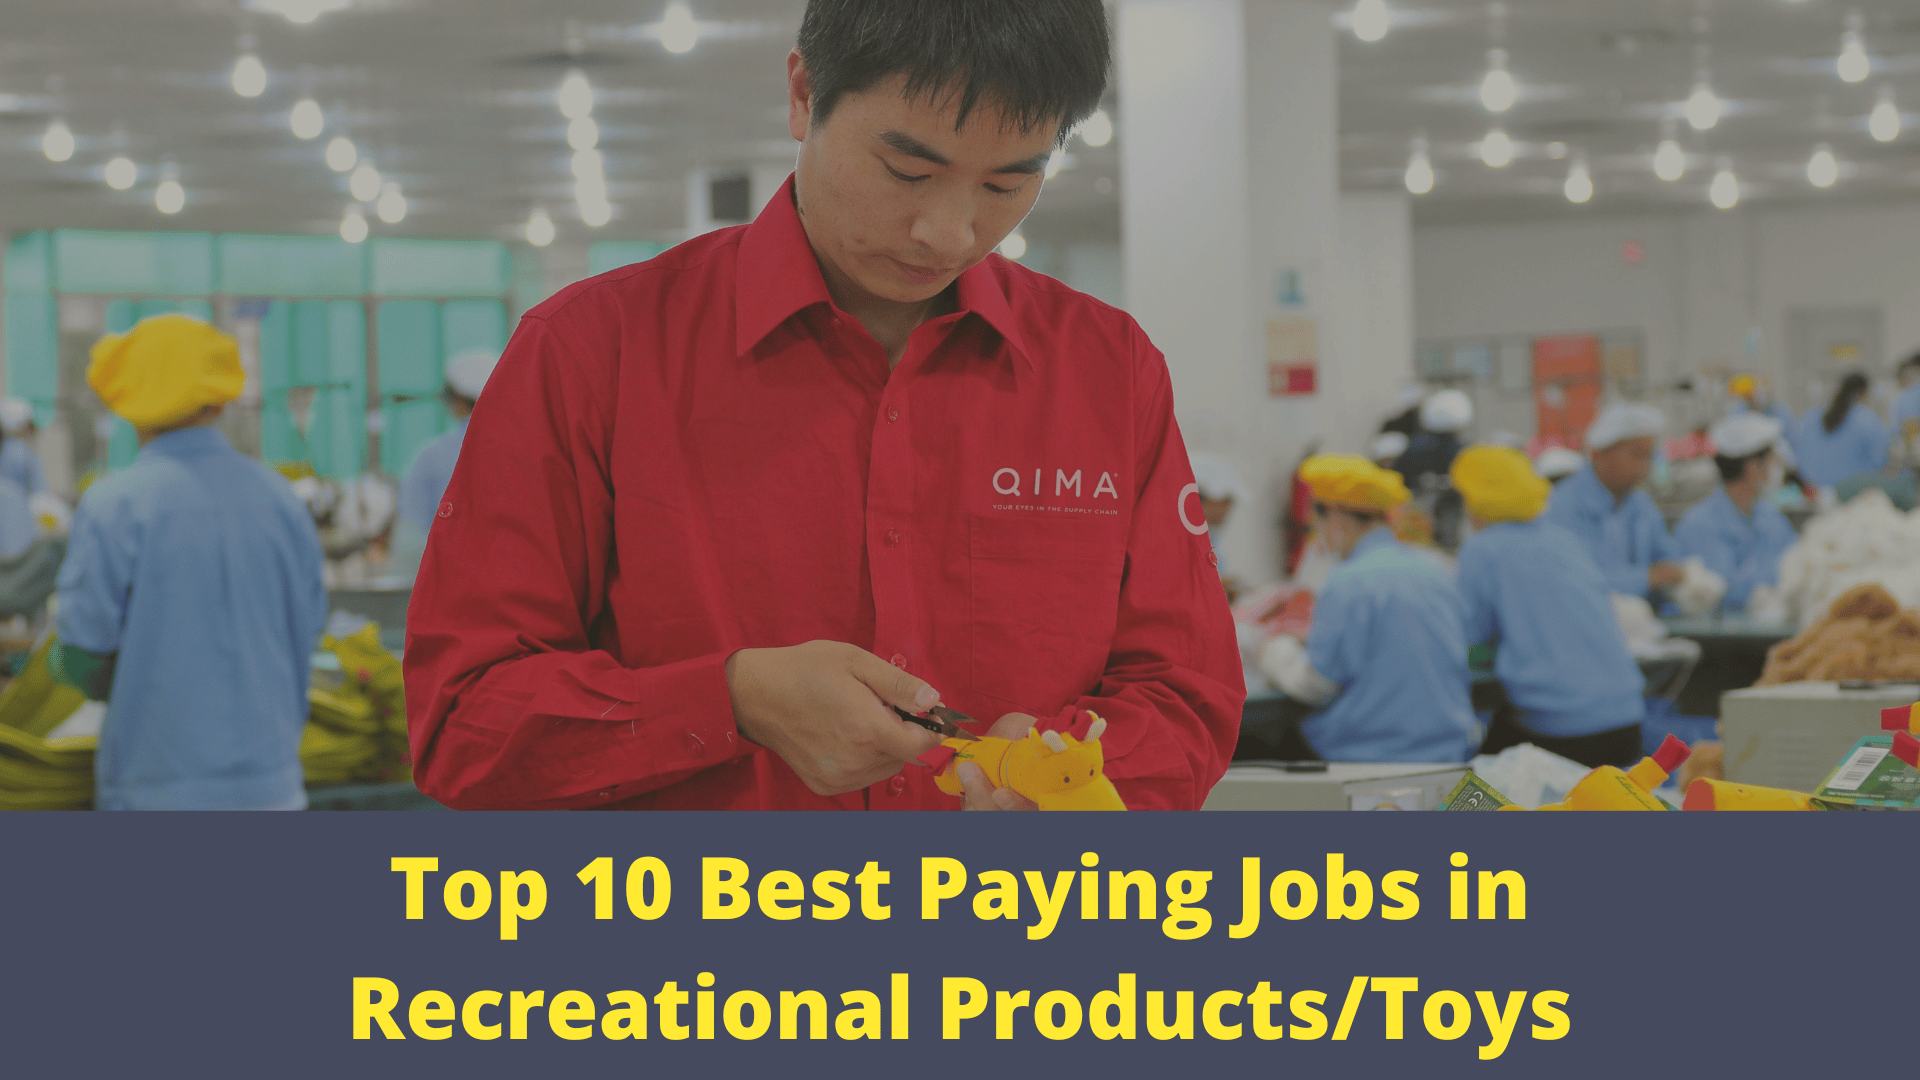 Top 10 Best Paying Jobs in Recreational – The Jobs